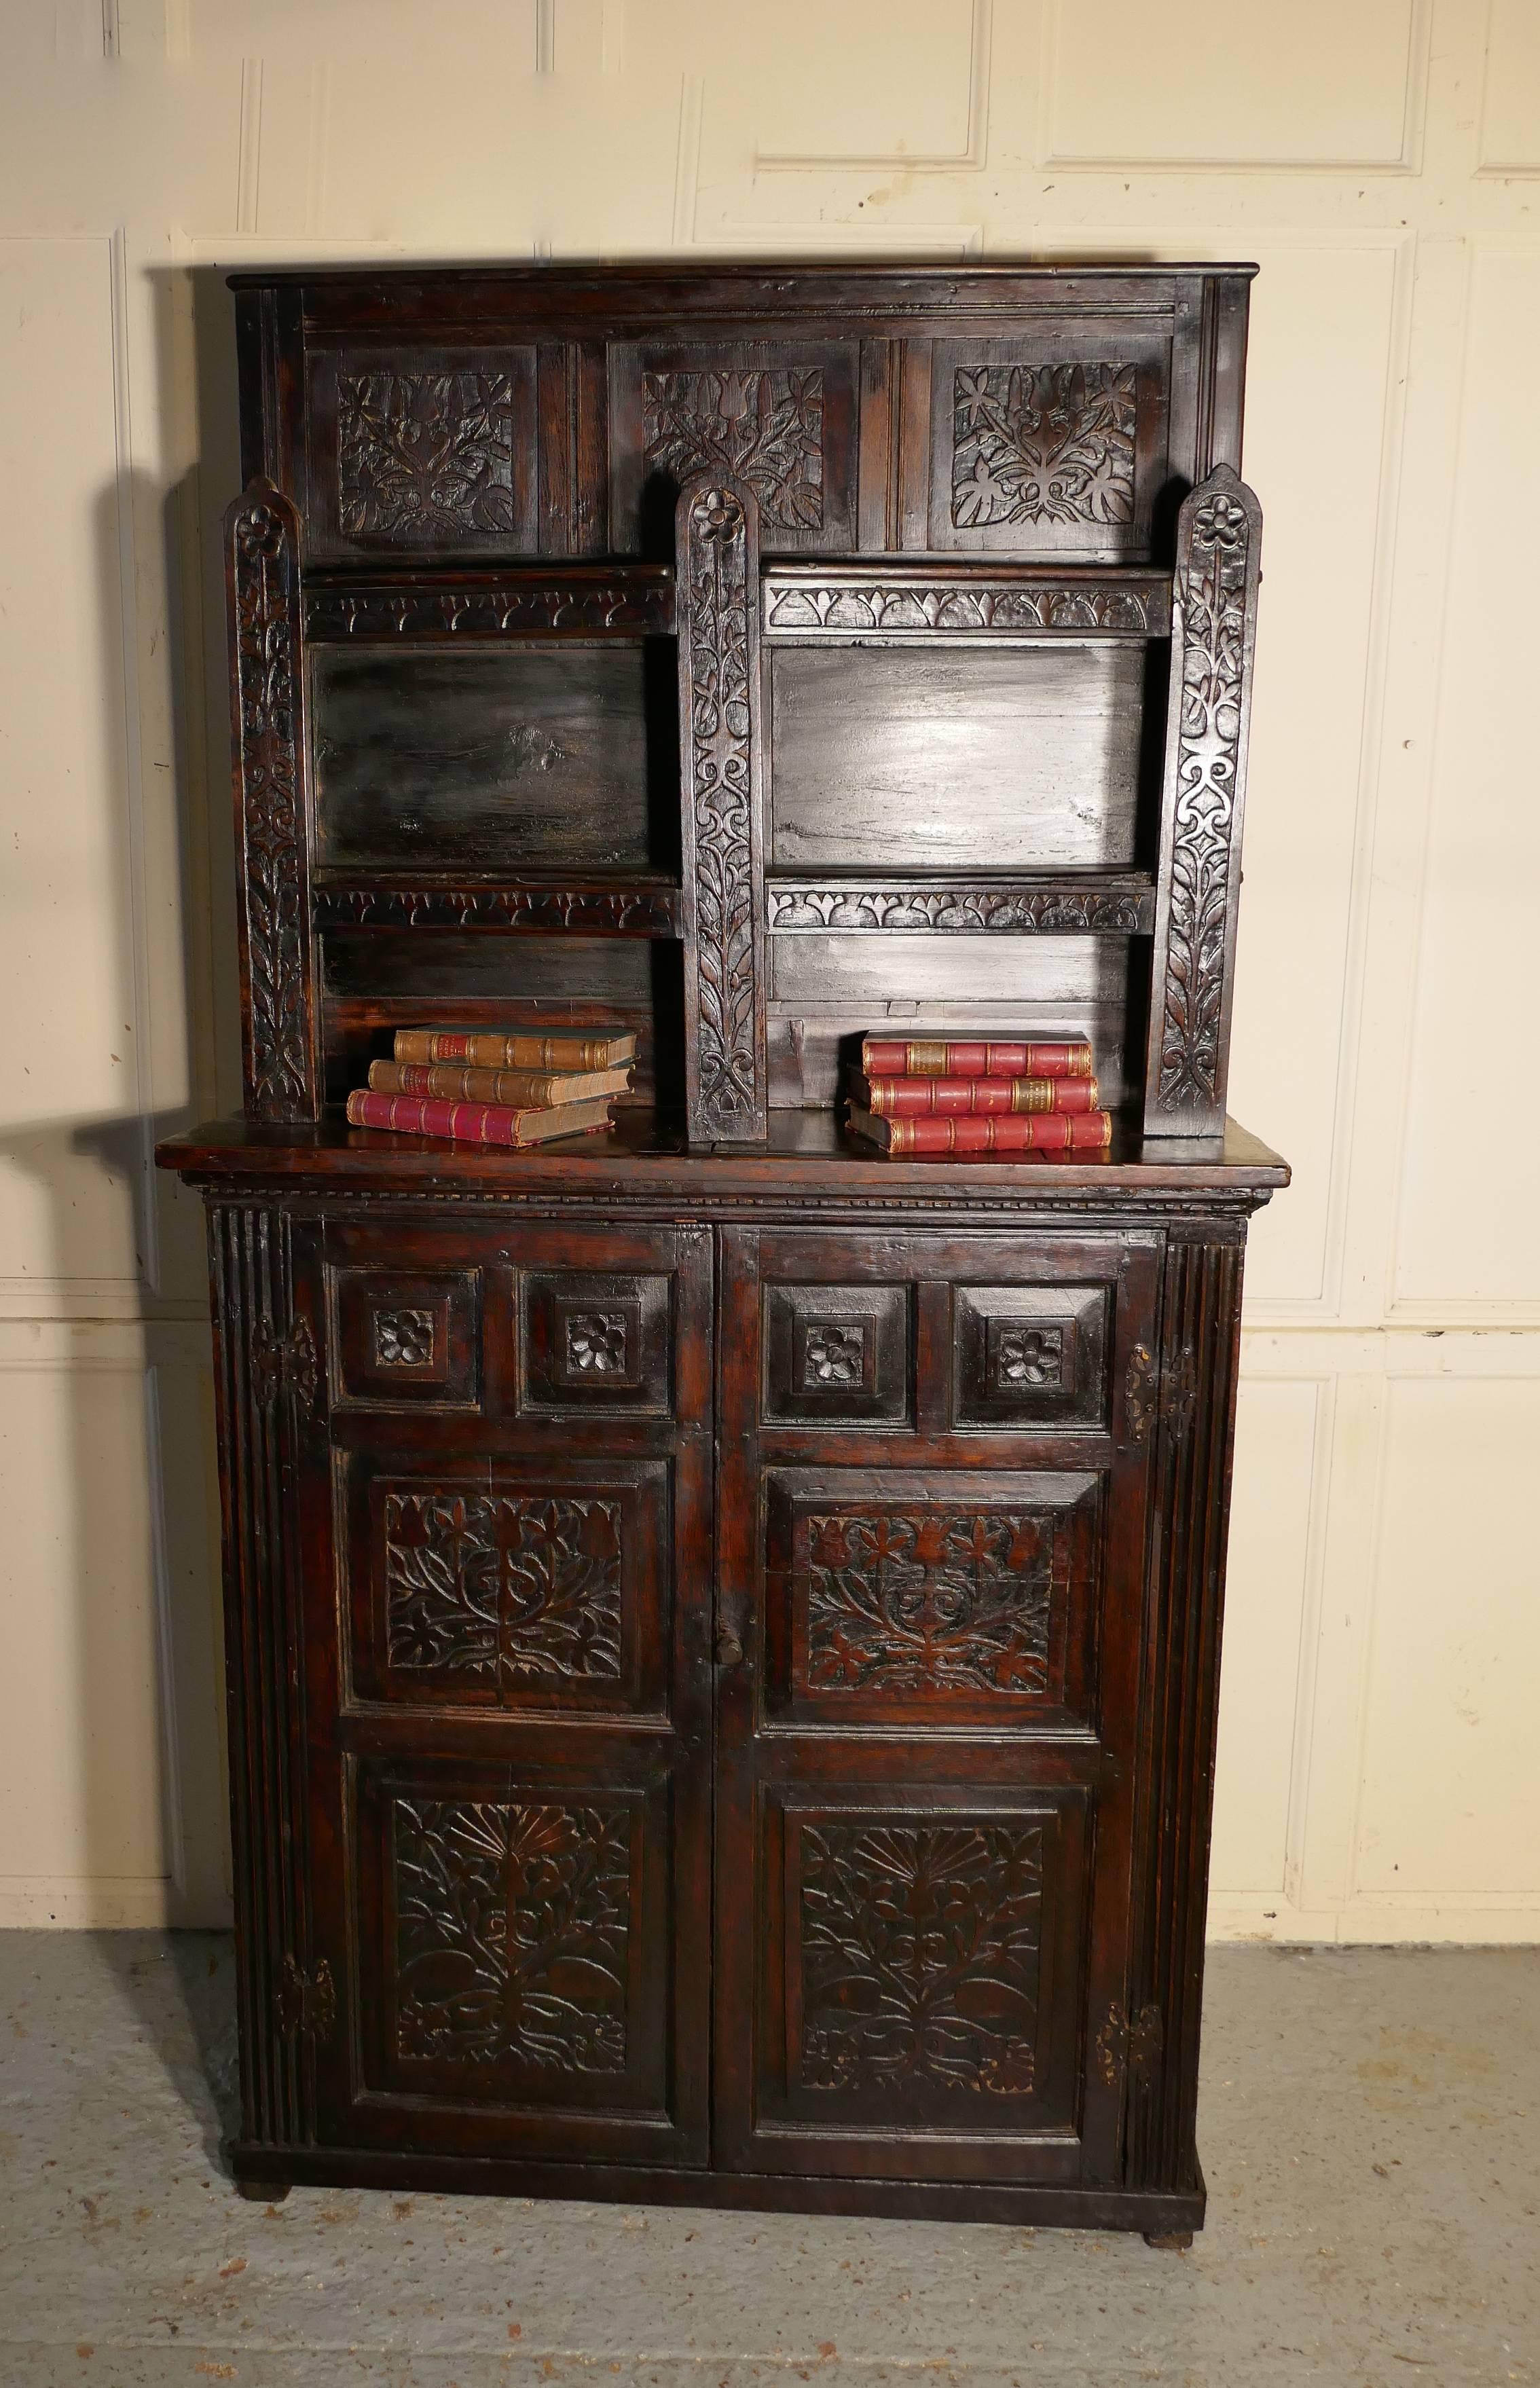 17th century antique housekeepers oak bookshelf cupboard

This is a very unusual antique cupboard, the upper part has a bowed shape and open shelves with a 
carved high galleried top and front rails. This is set on a shallow shelved cupboard